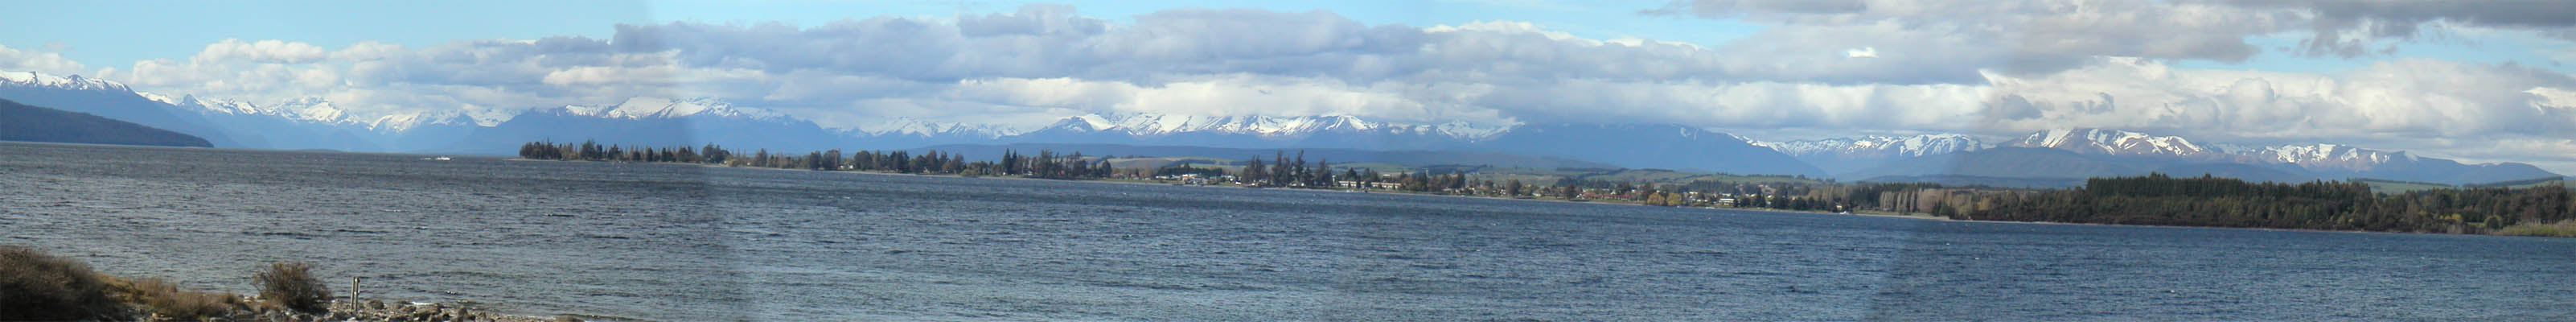 I hiked along the lake to the opposite side, where I got this panoramic view of the town of Te Anau and the mountains behind it.